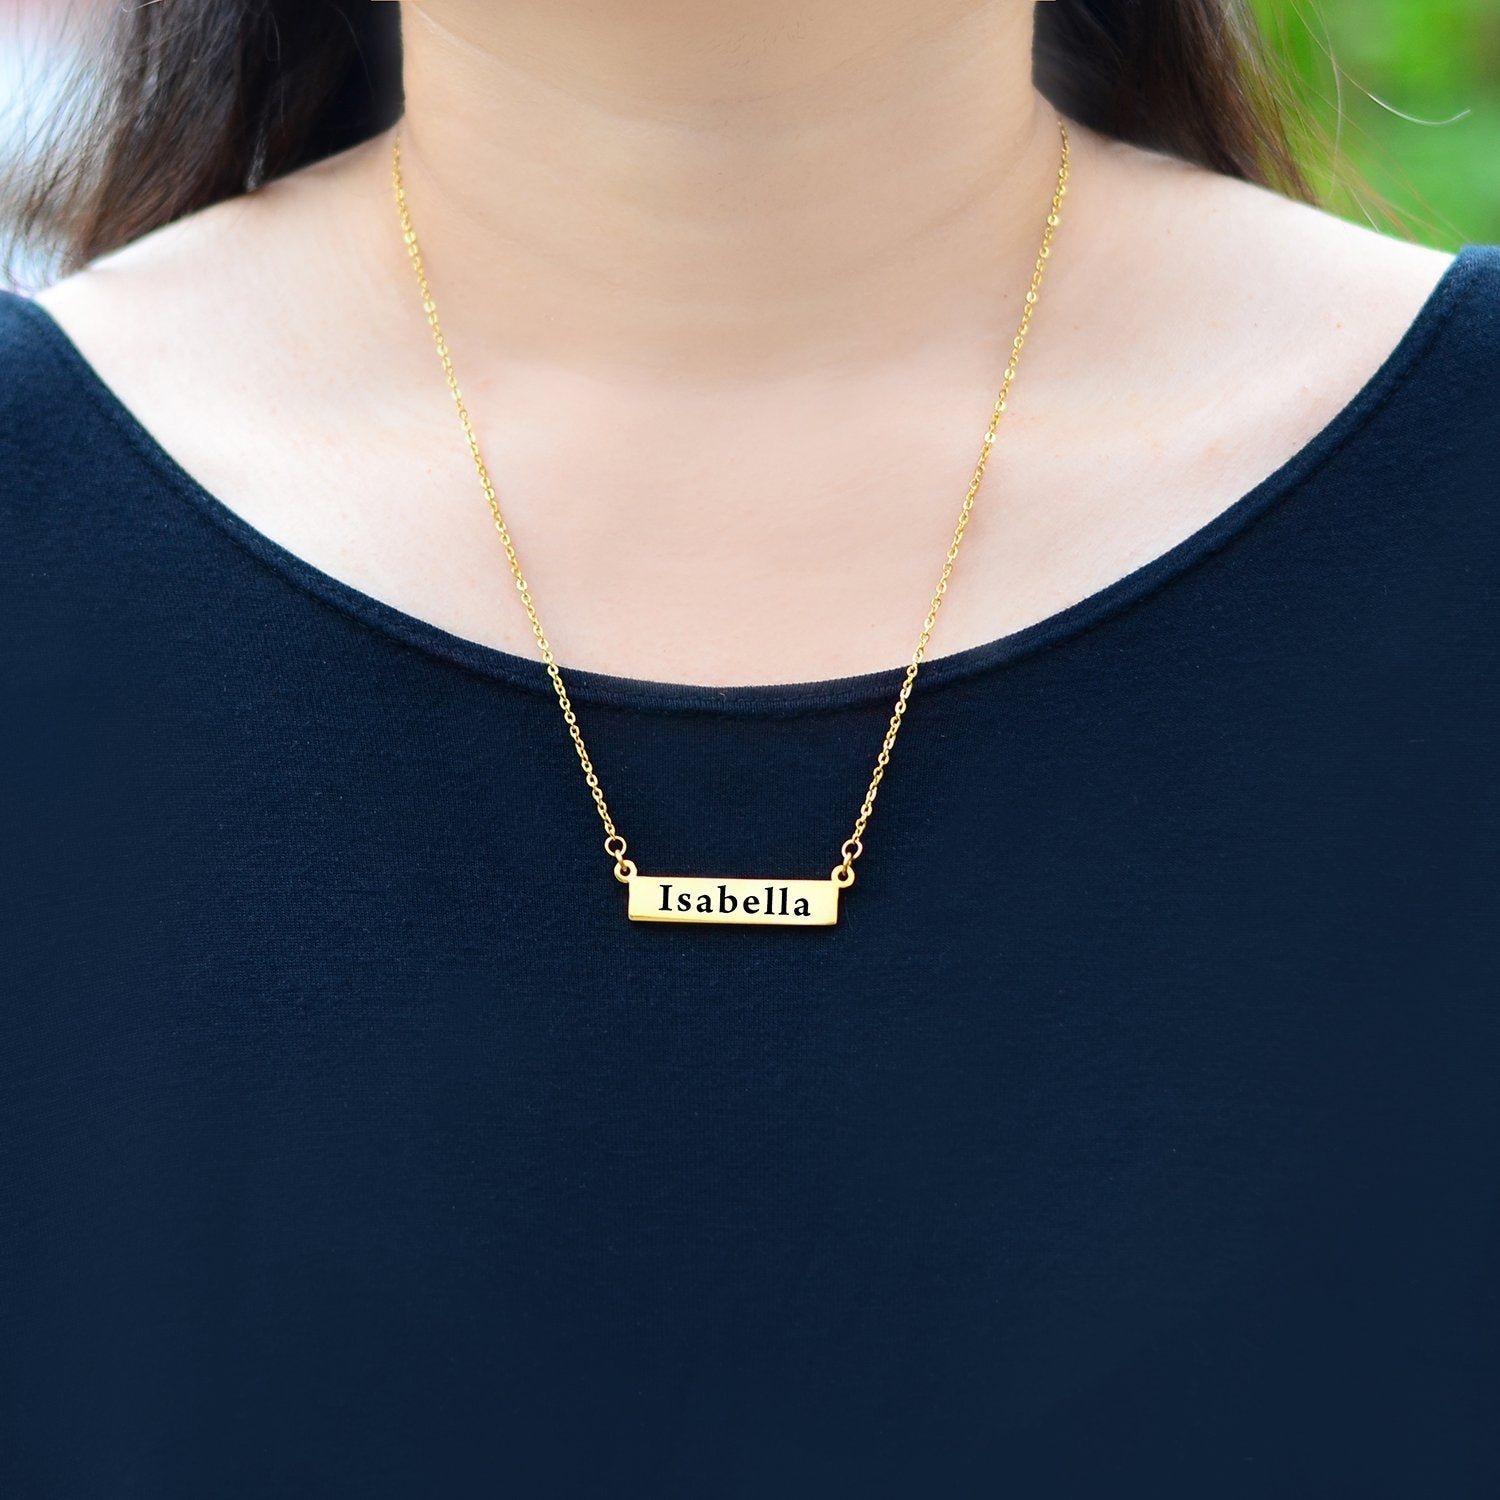 The Jess Name Bar Necklace - Name Necklaces by Belle Fever